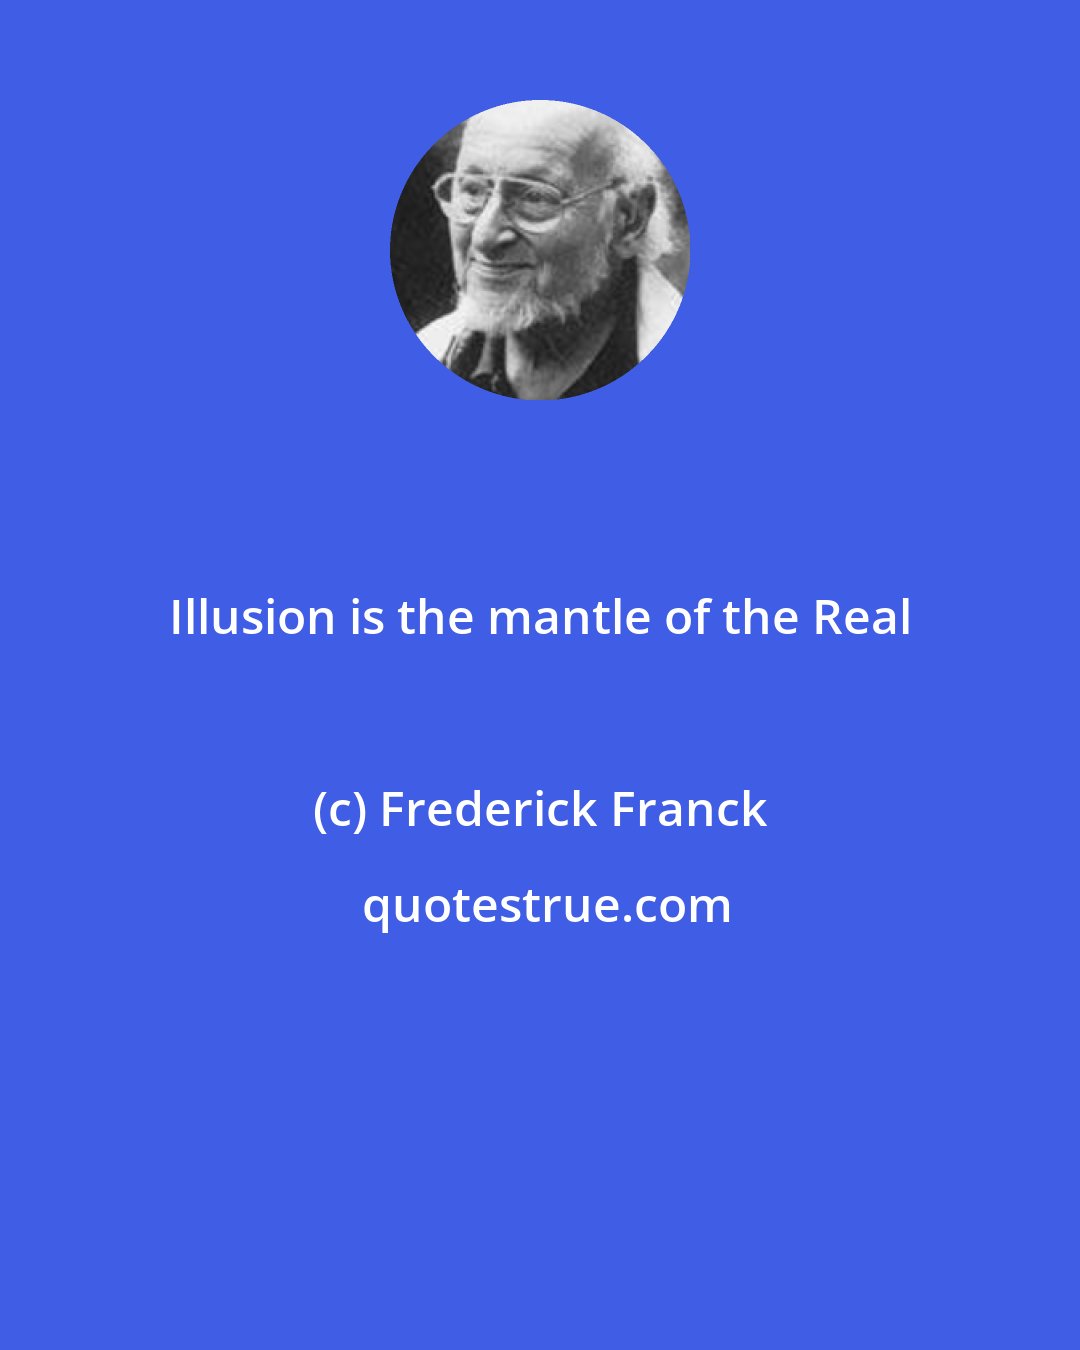 Frederick Franck: Illusion is the mantle of the Real